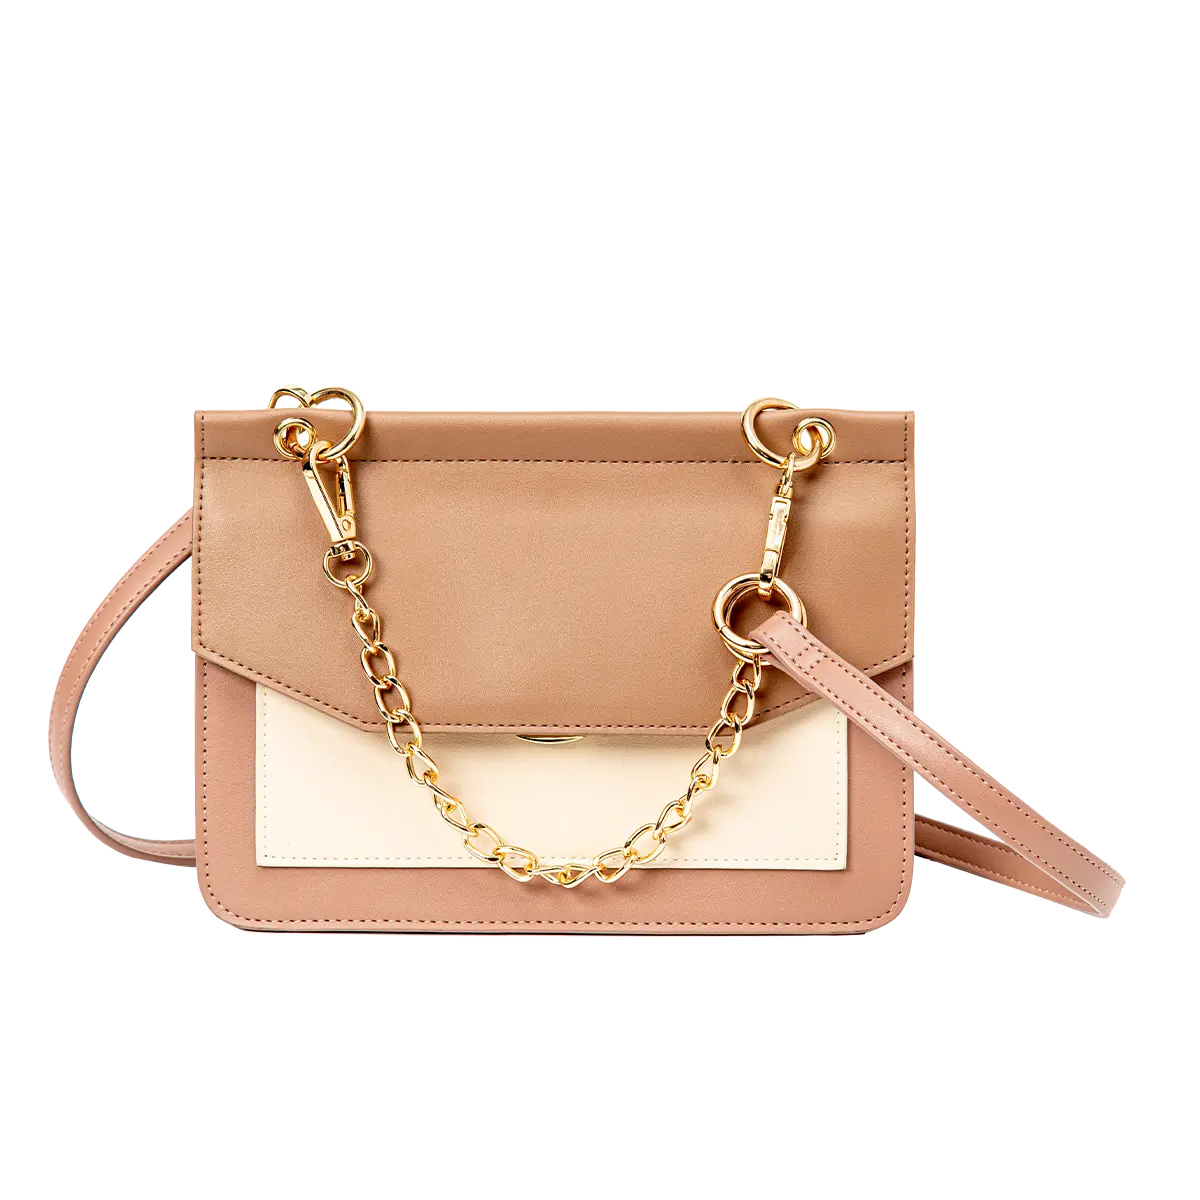 Fashionable PU Leather Shoulder Bag Women With Chain Contrast Color Design Exquisite Style Lady Shoulder Bag